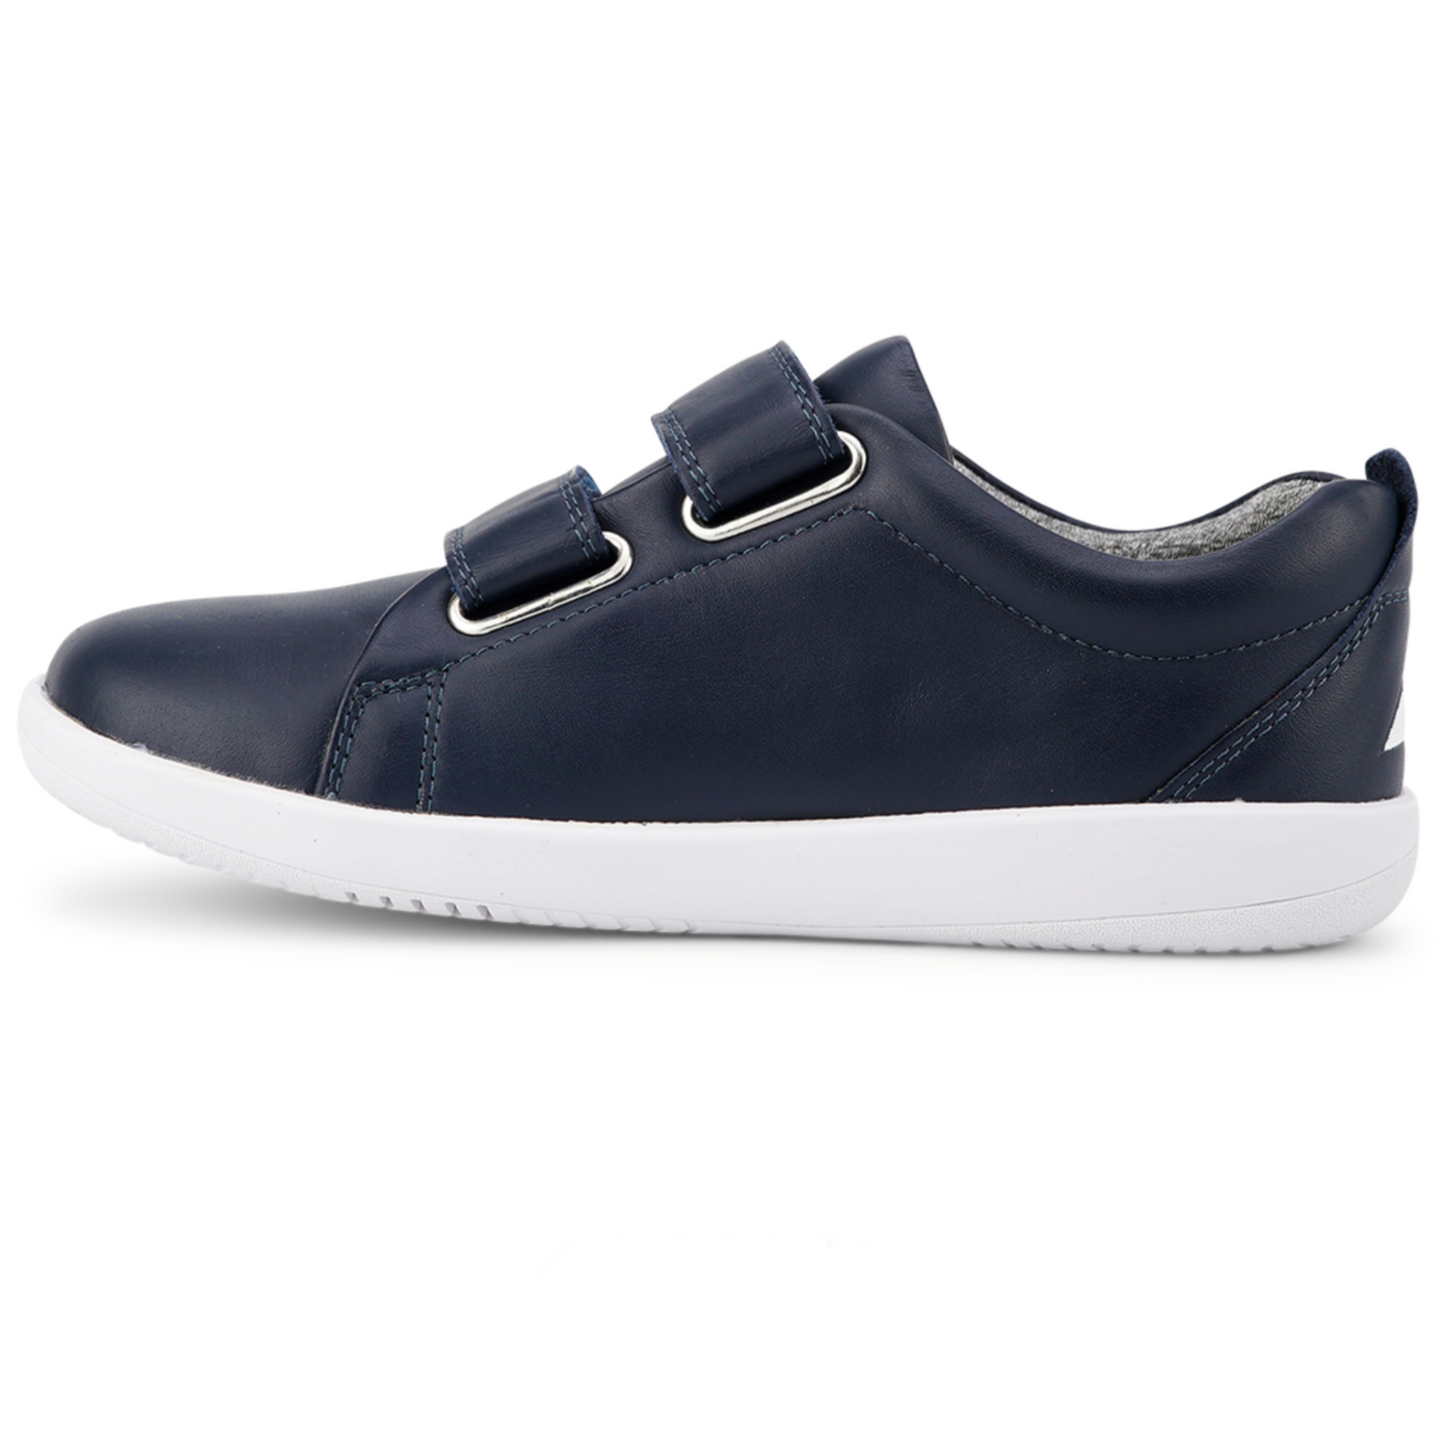 Bobux Grass Court Navy Leather Trainers